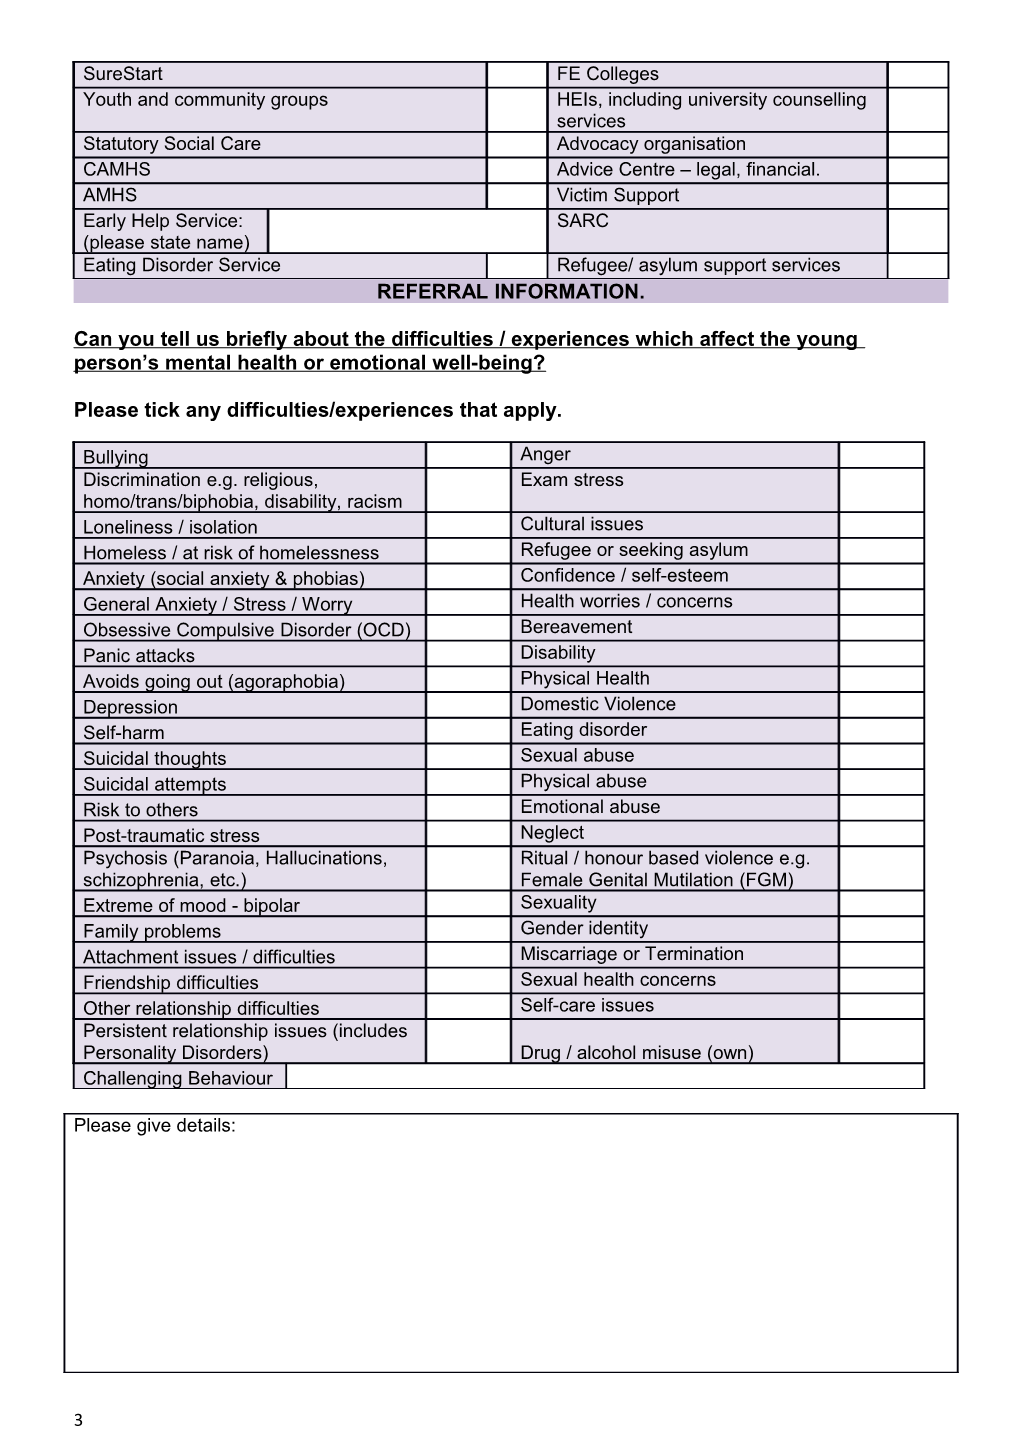 42Nd Street Referral Form 2016 - for Professionals